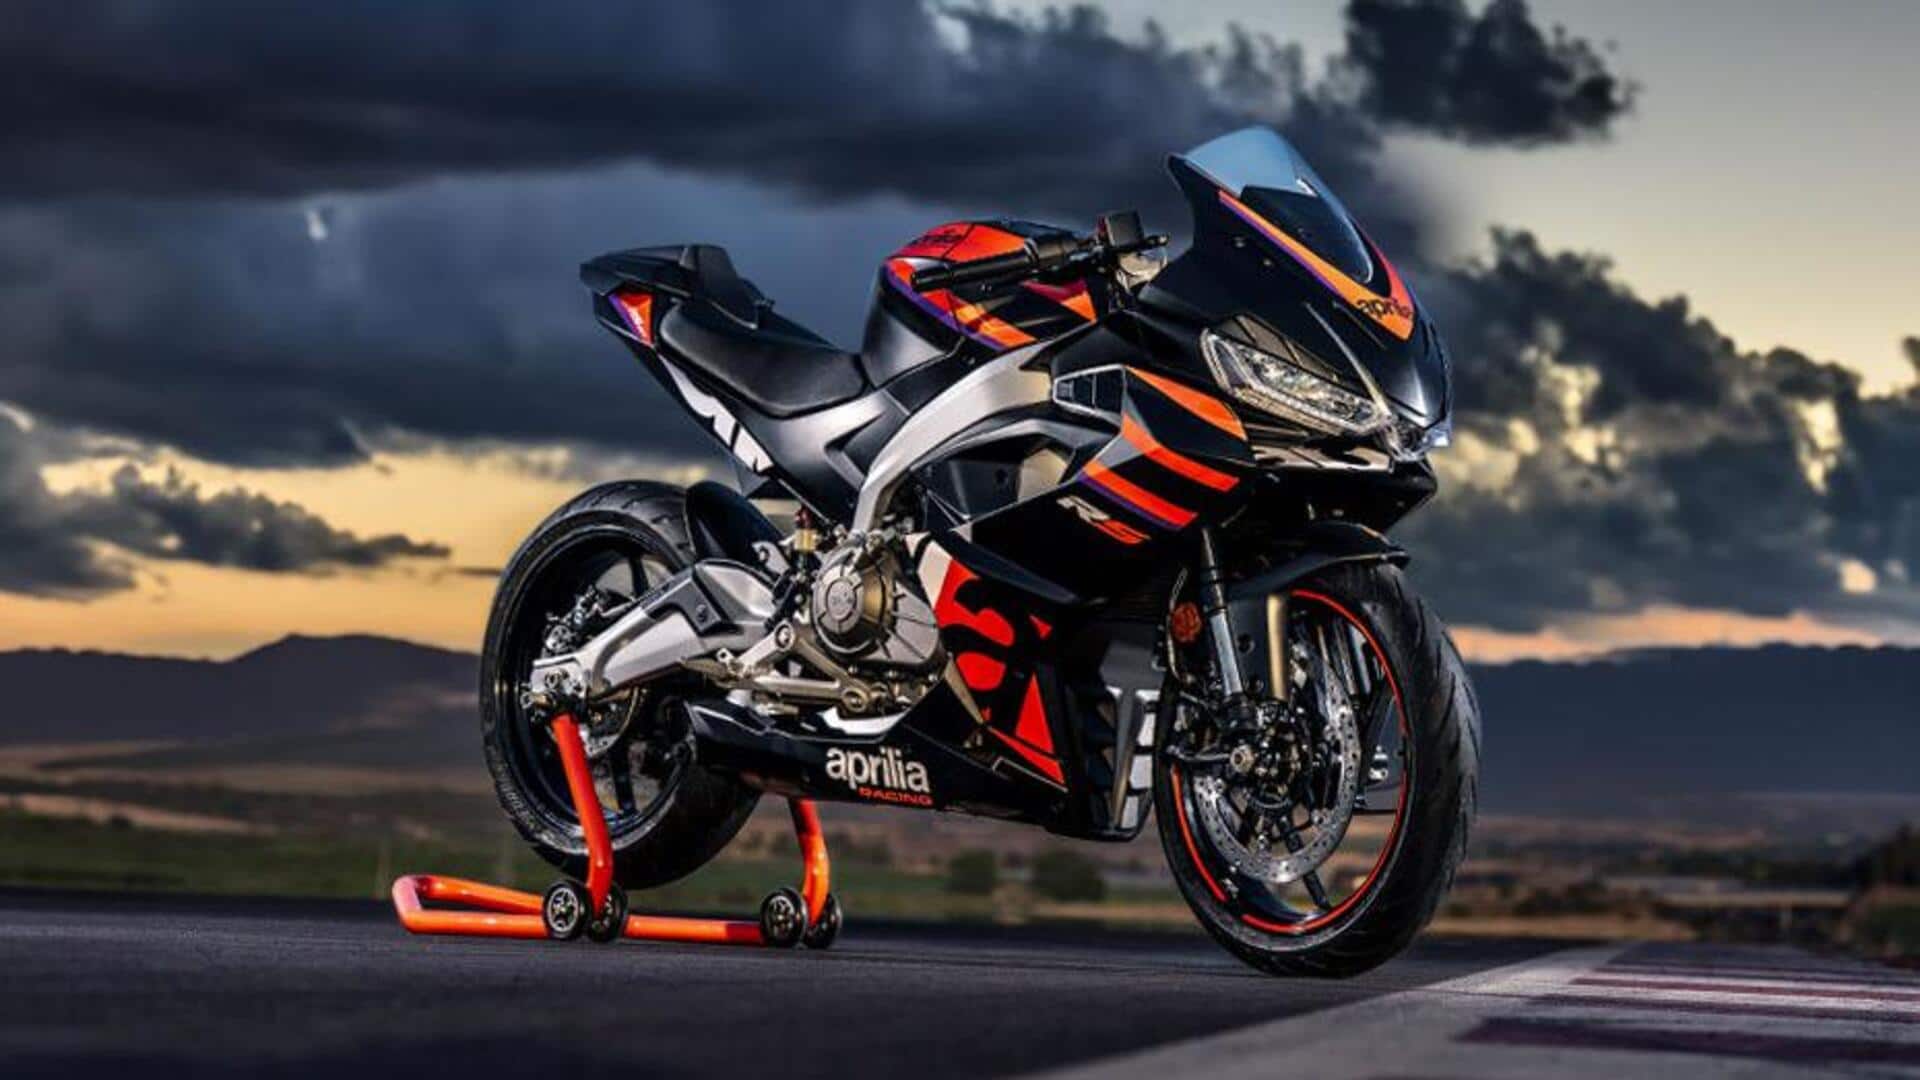 Made-in-India Aprilia RS 457 makes its way to UK